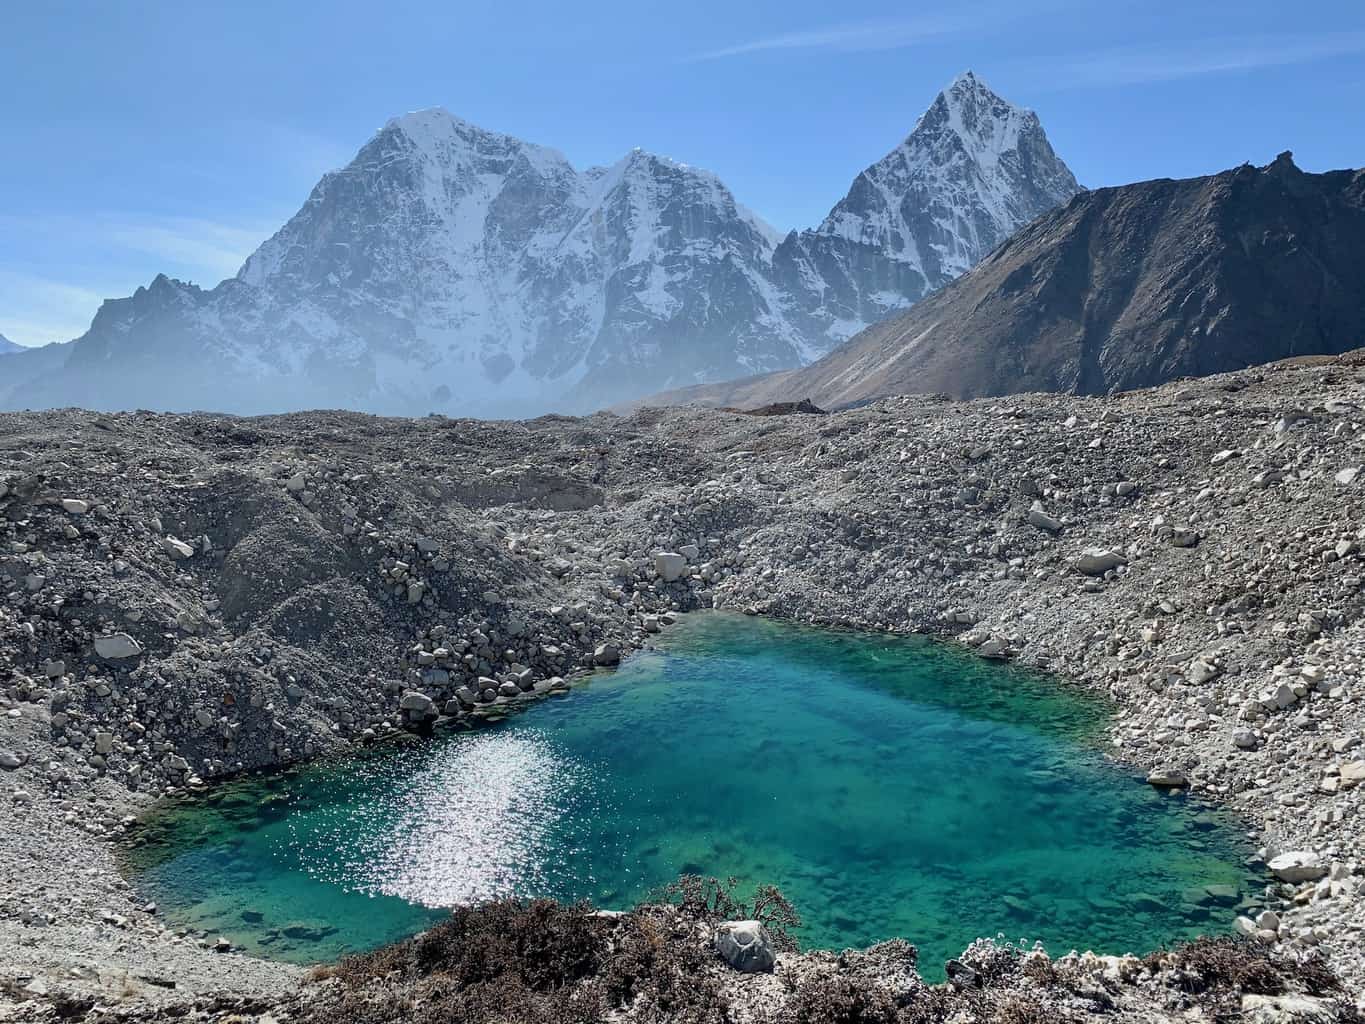 Everest Base Camp Trek Distance, Elevation Gain, & Time by Day